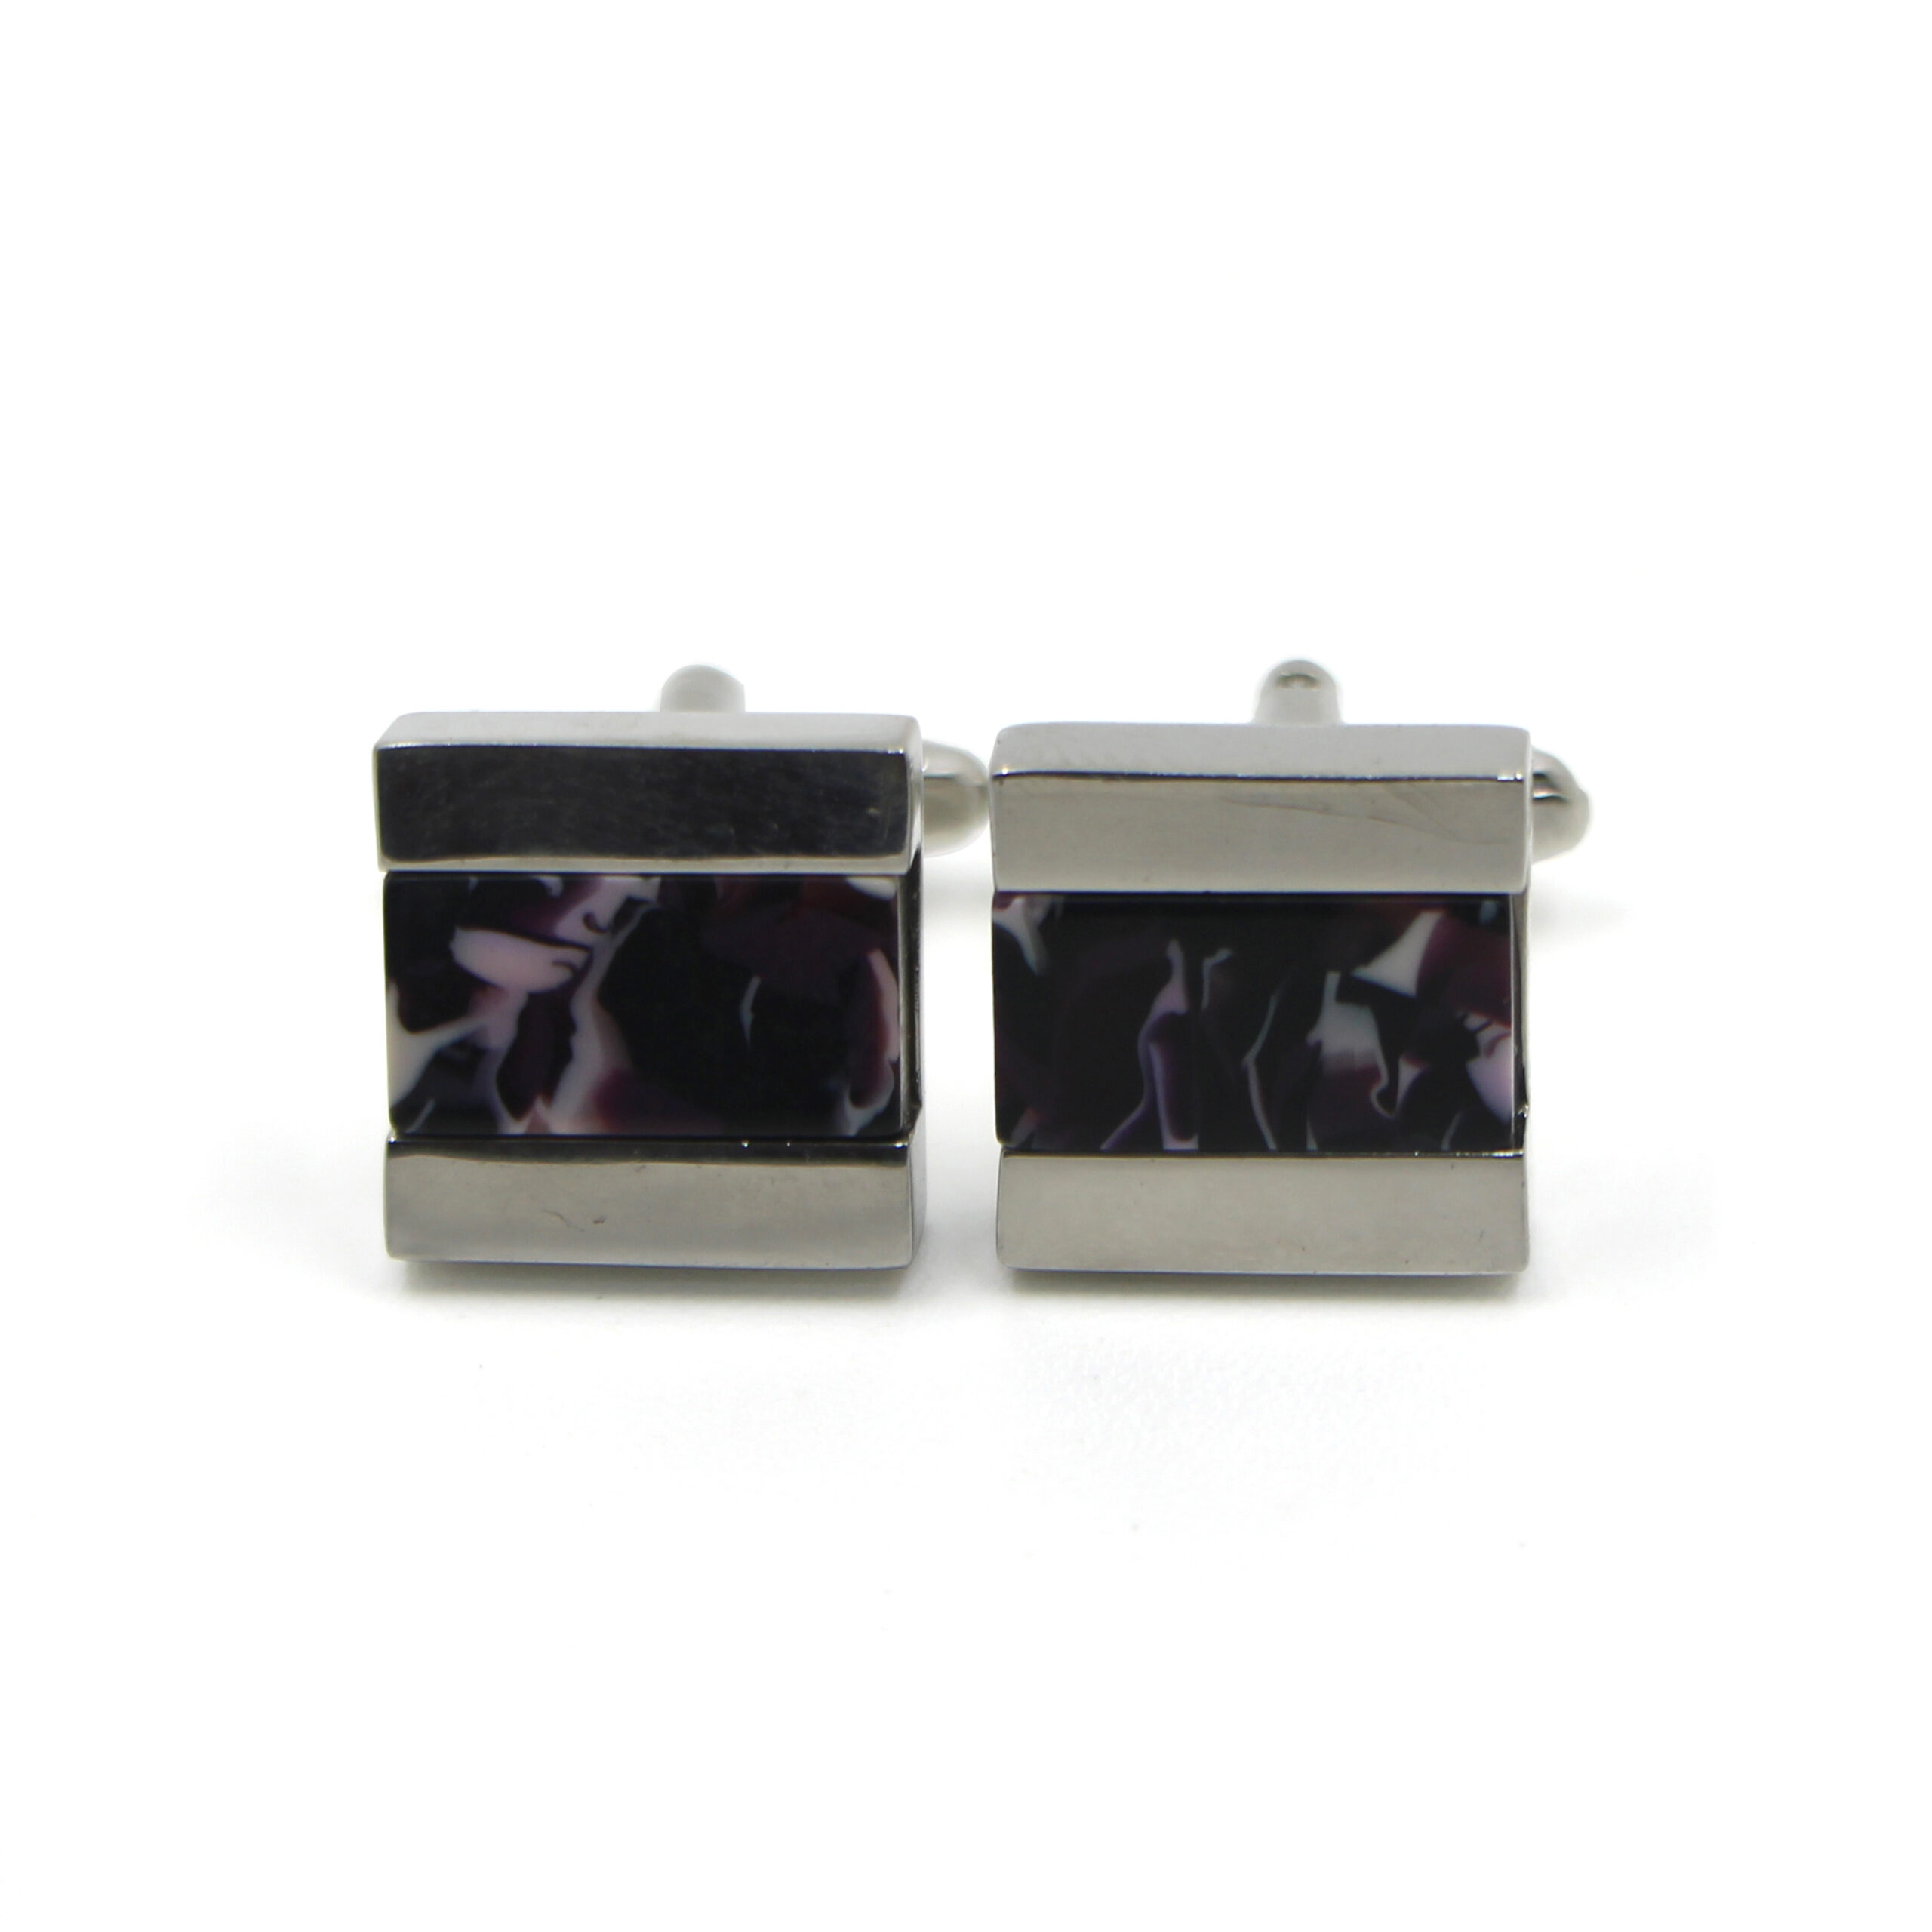 Cufflers Vintage Cufflinks for Men’s Shirt with a Gift Box – CU-1023 – Purple